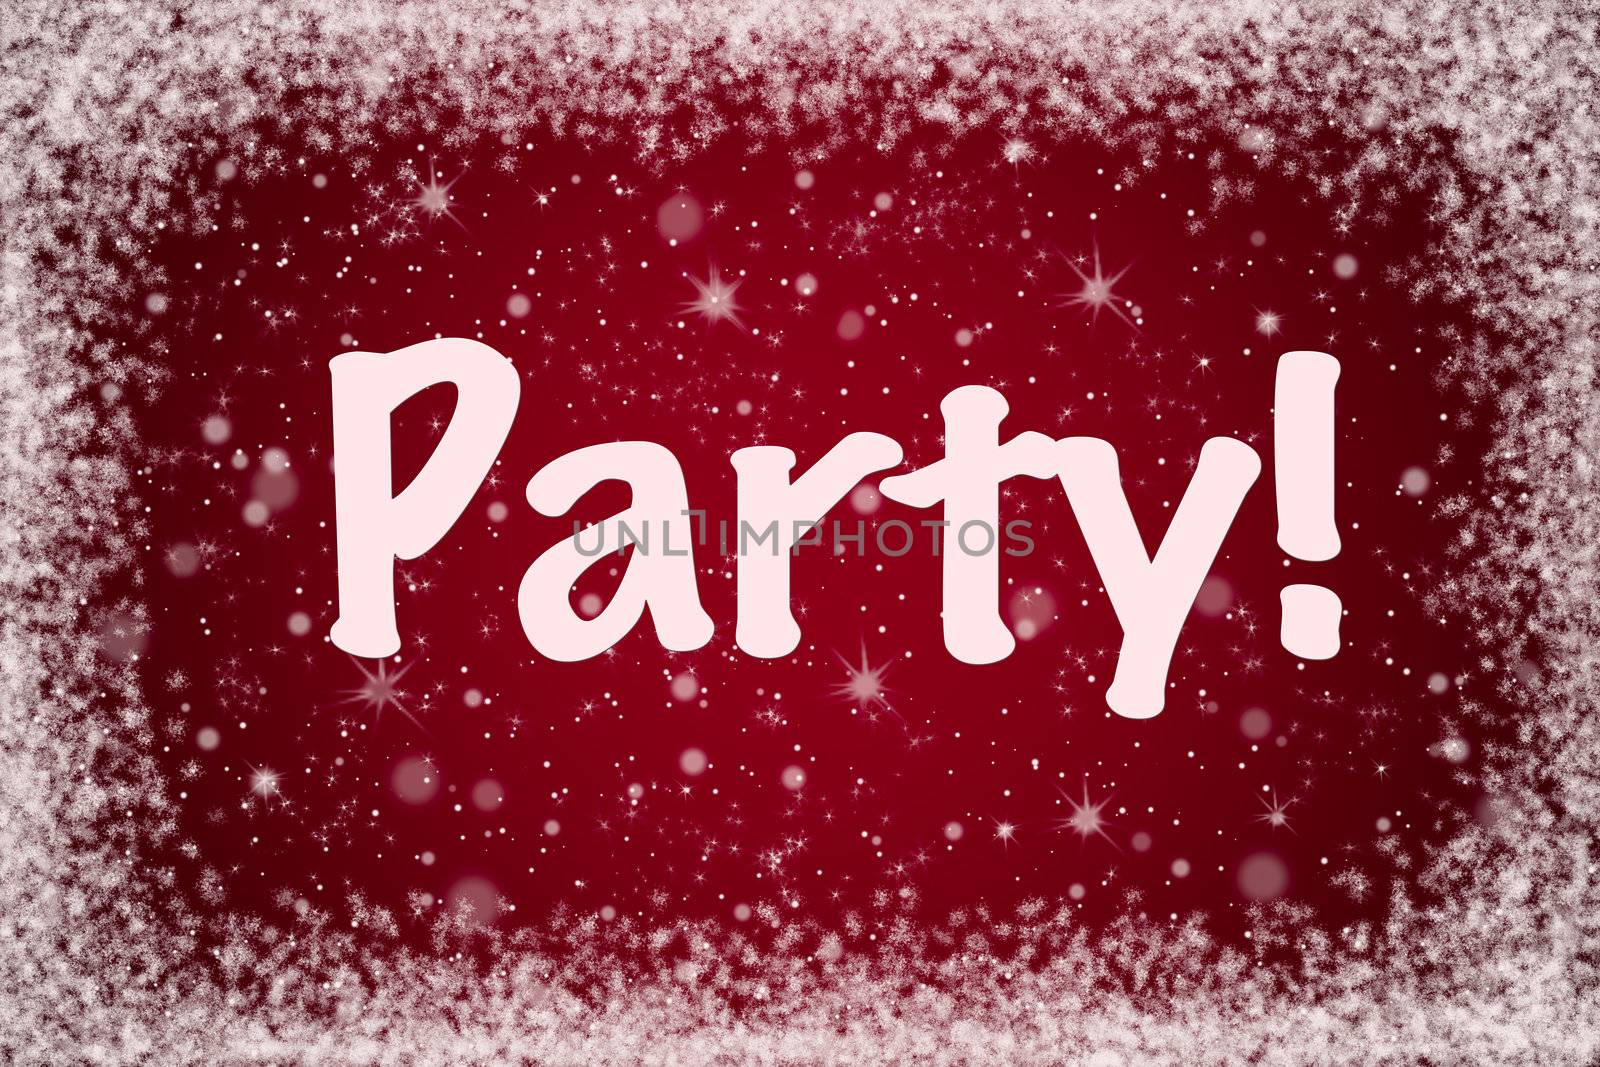 Winter Party Invitation on Red Sparkly Snow Background by scheriton